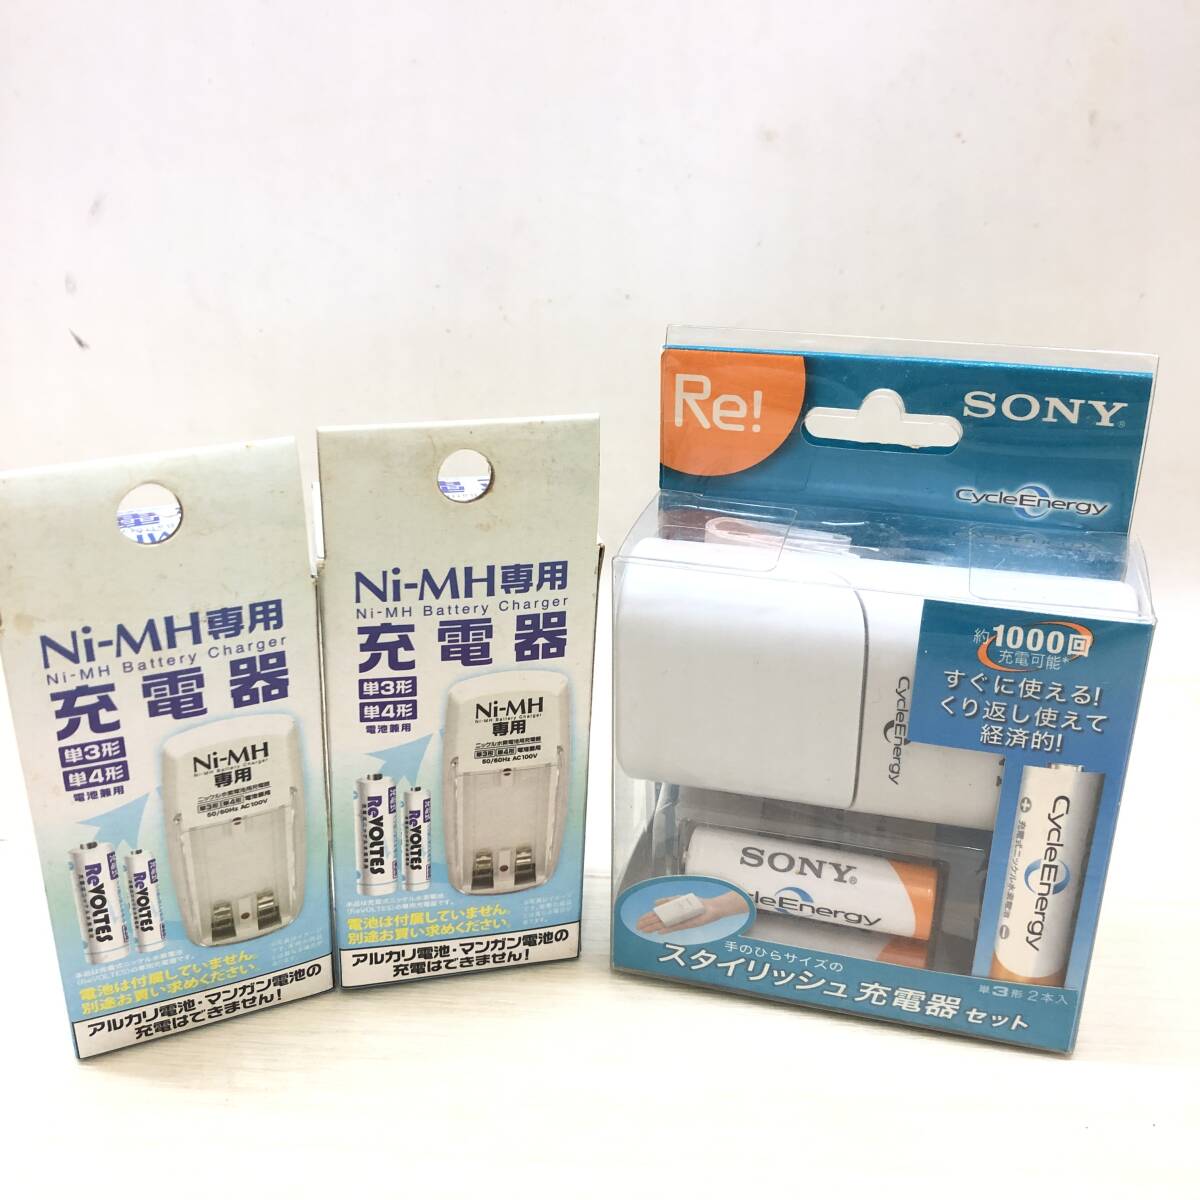 ^ SONY Sony rechargeable Nickel-Metal Hydride battery exclusive use compact charger set BCG-34HTD2K NI-MH exclusive use charger 3 point electrification verification settled secondhand goods ^R72812